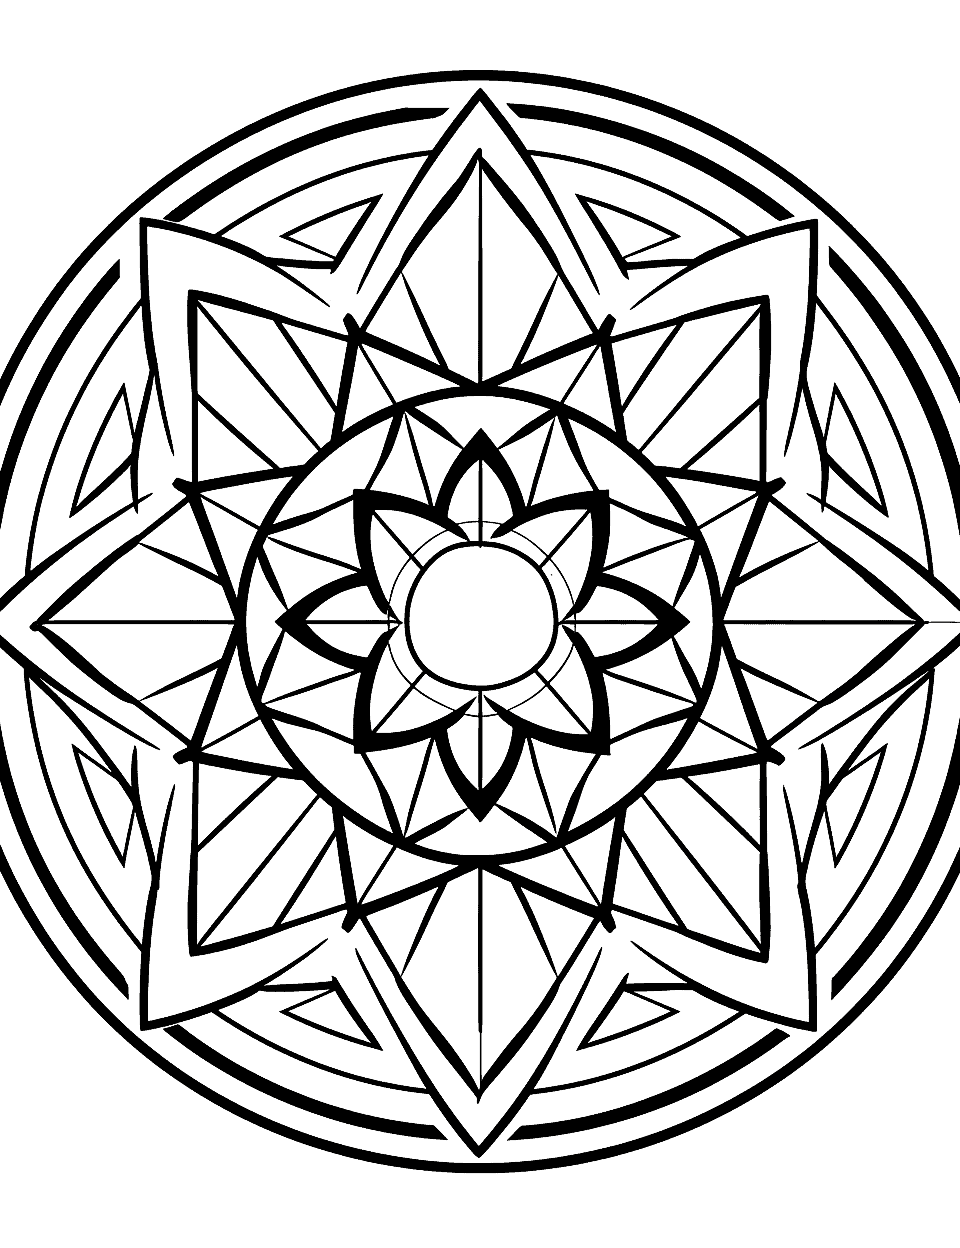 Dazzling Diamond Mandala Coloring Page - A geometric mandala filled with diamond shapes and patterns, perfect for coloring with bright, vibrant colors.